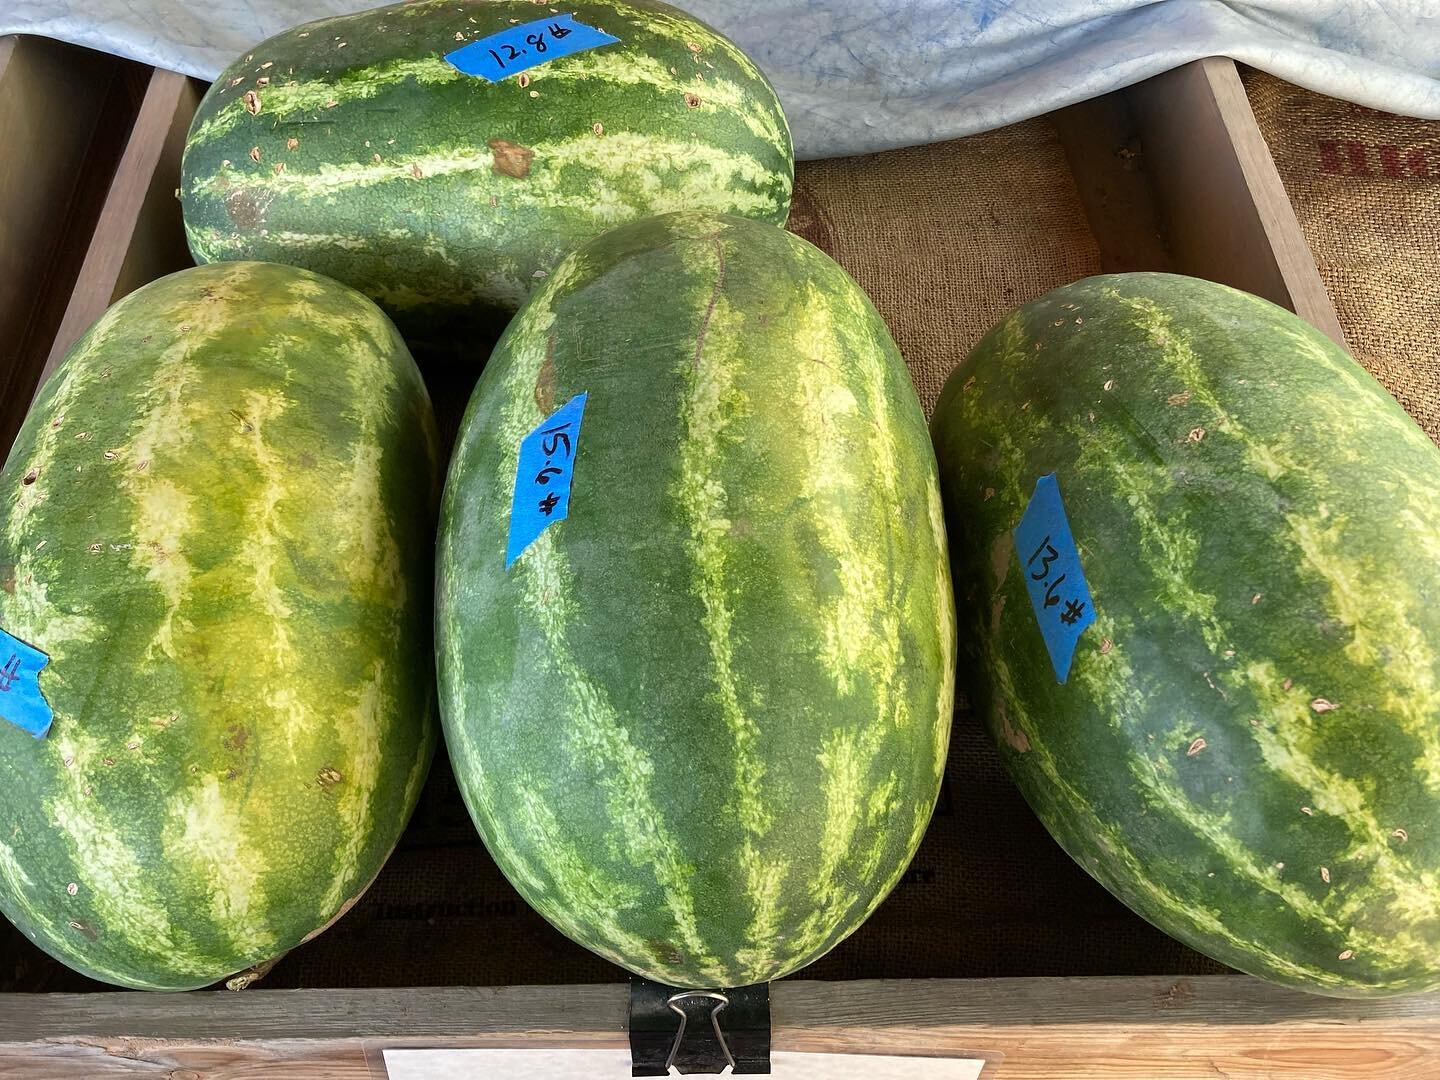 We still have Tohono O&rsquo;odham yellow-melted watermelons! Come see Mission Garden in all its summer lushness! #tohonooodhamyellowmeatedwatermelon #heirloomproduce #heirloomgardening #heritageorchard #tucsoncityofgastronomy #missiongarden